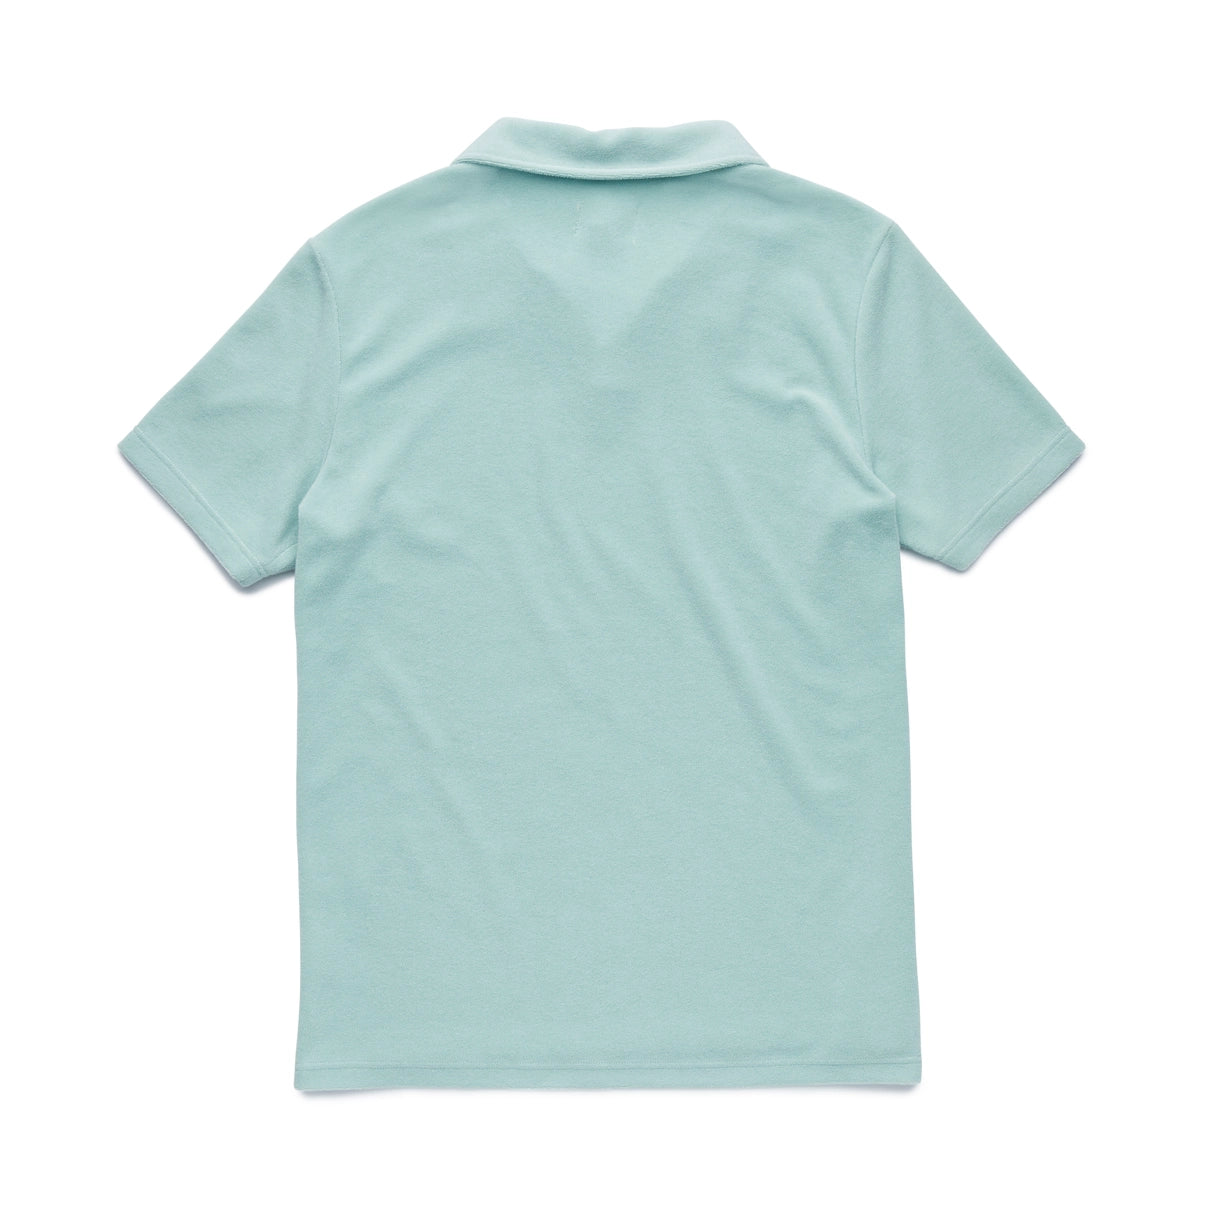 Surfside Terry Polo-Mint